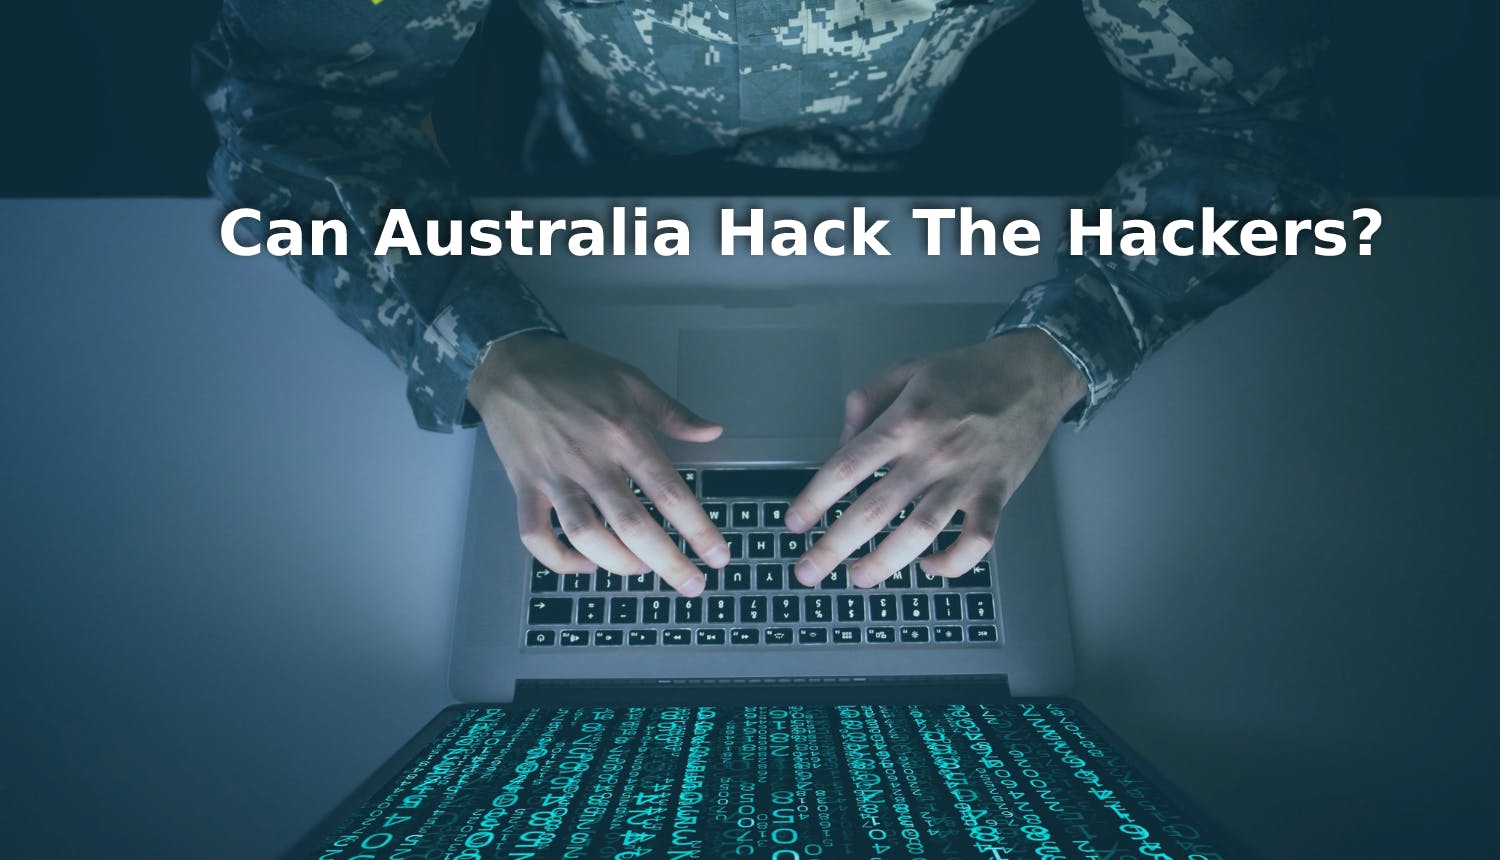 According to Australia, Best Defense is Attack: “Hack the Hackers”